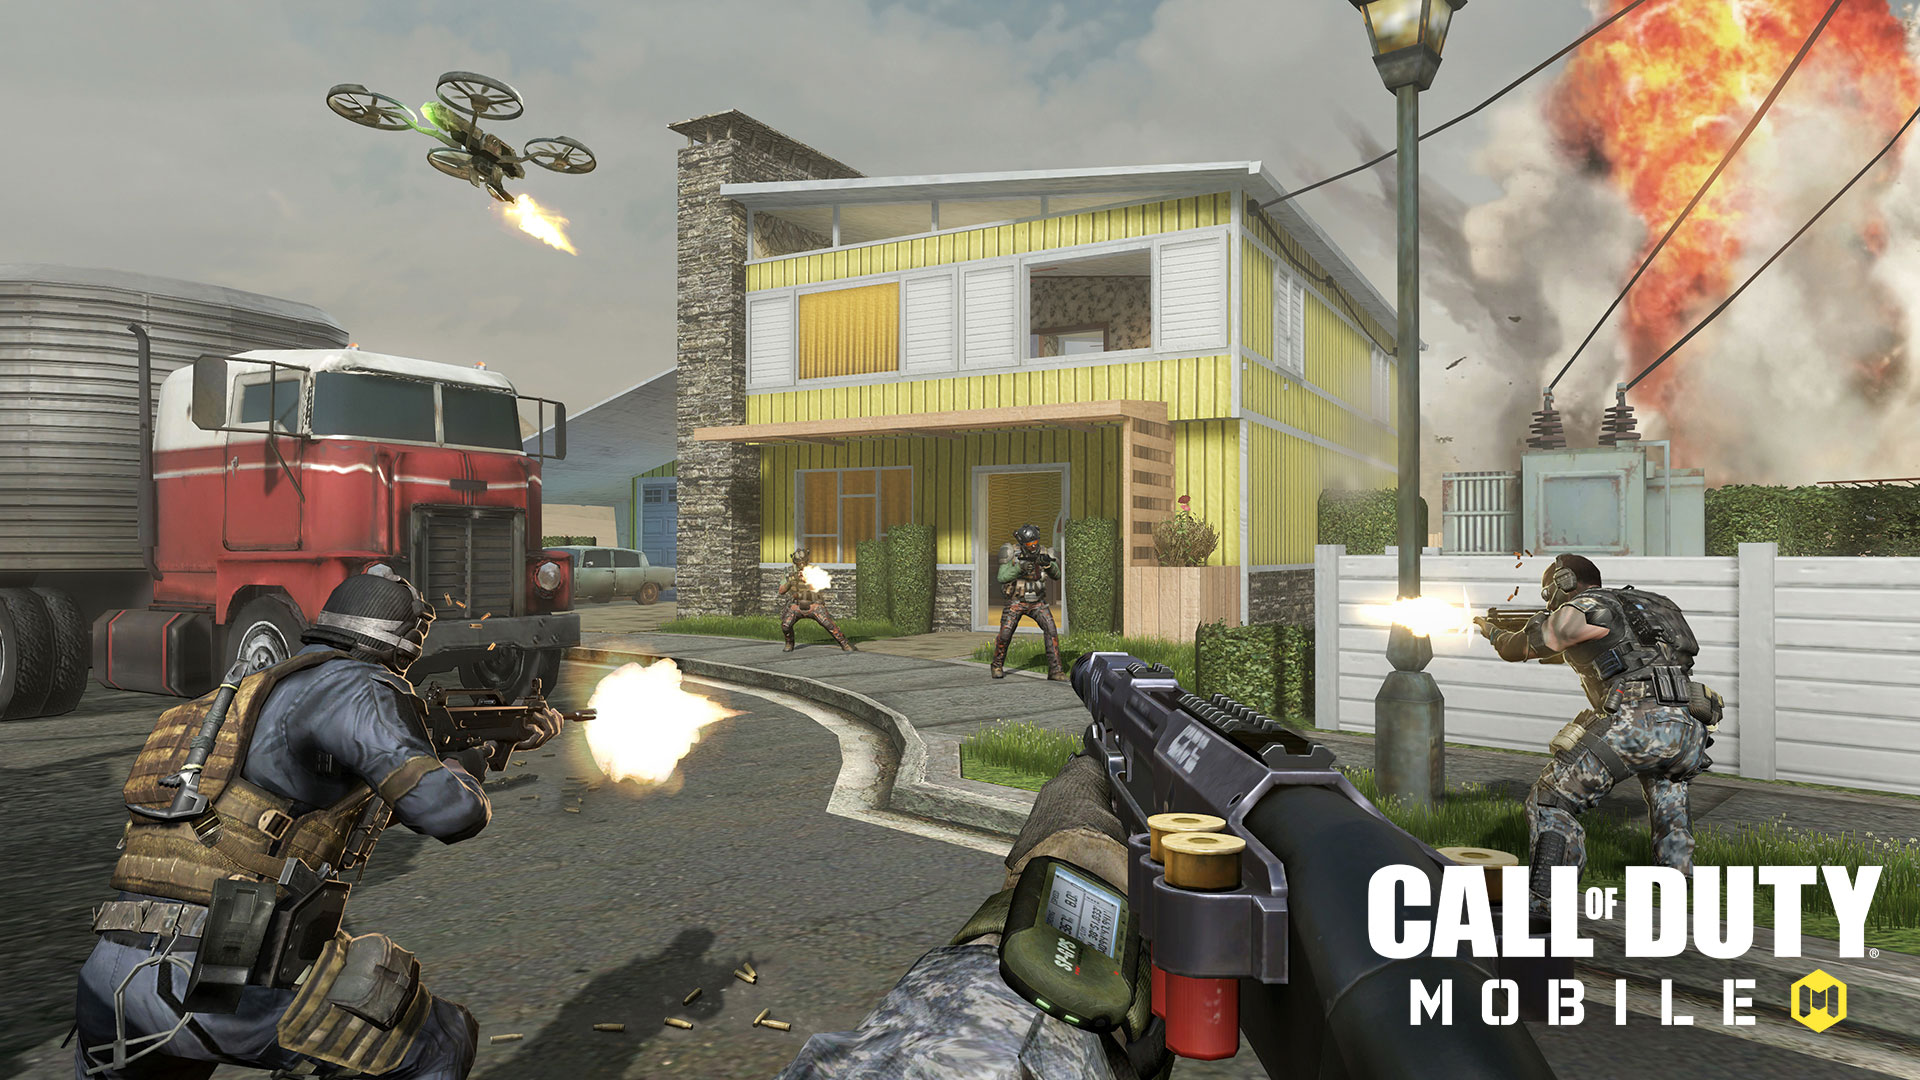 Nuketown in Call of Duty: Mobile.